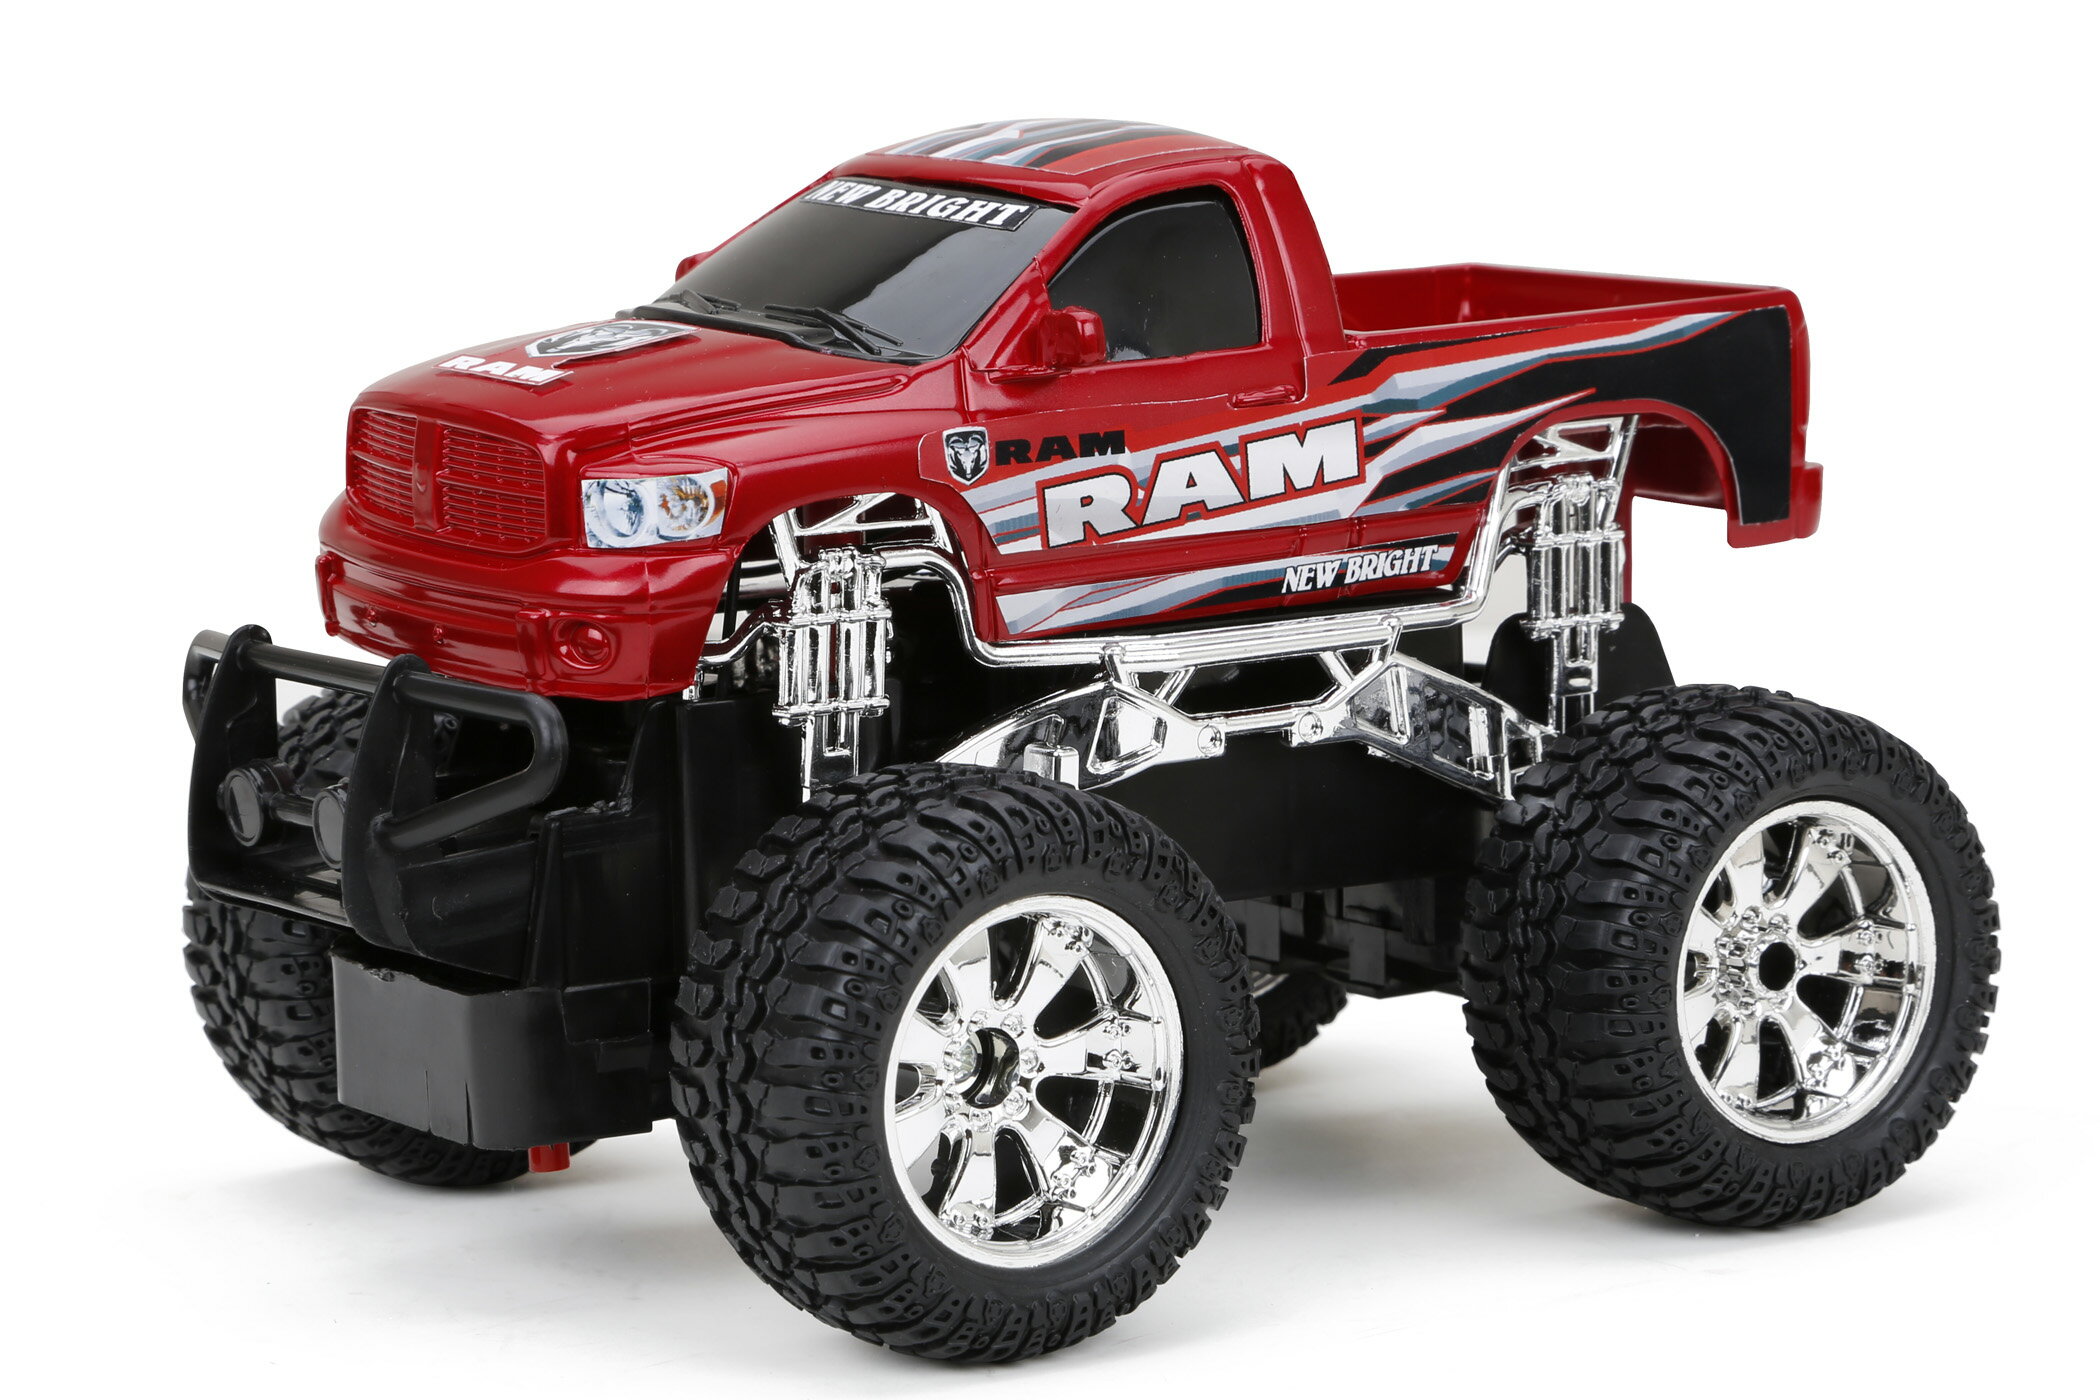 Gizmo Toy New Bright Rc Ford F 150 Raptor Truck Bright Red Full